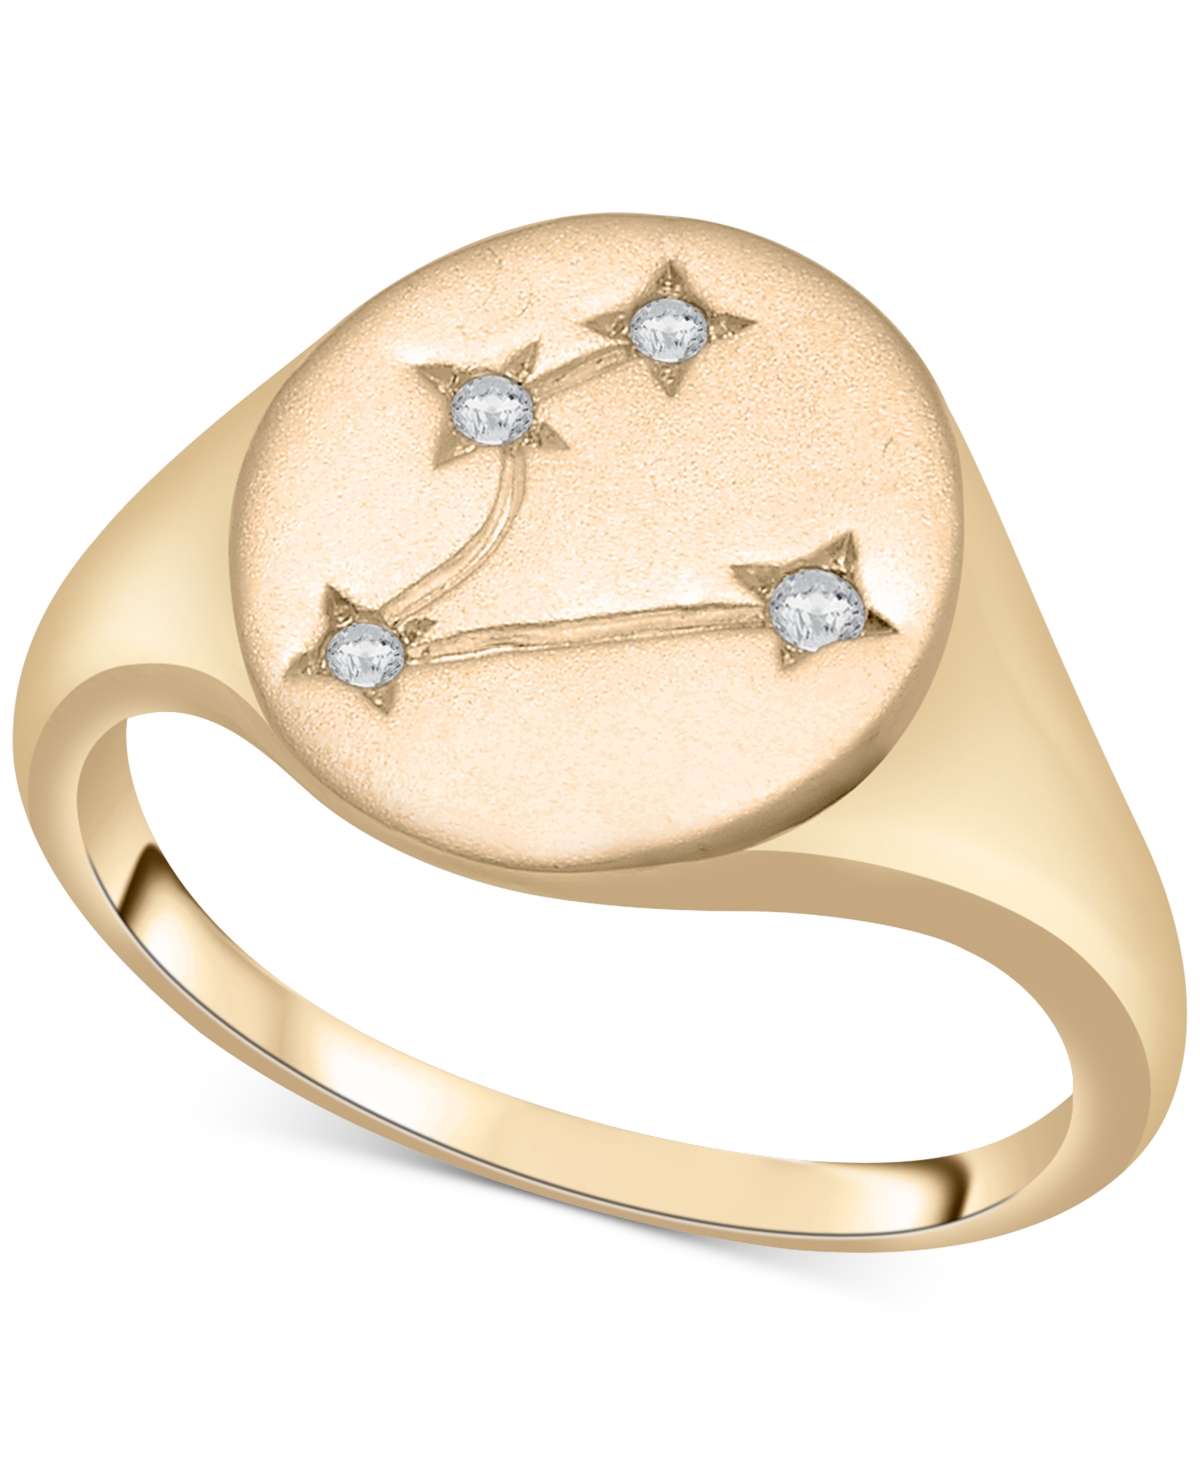 Diamond Pisces Constellation Ring (1/20 ct. t.w.) in 10k Gold, Created for Macy's - Yellow Gold